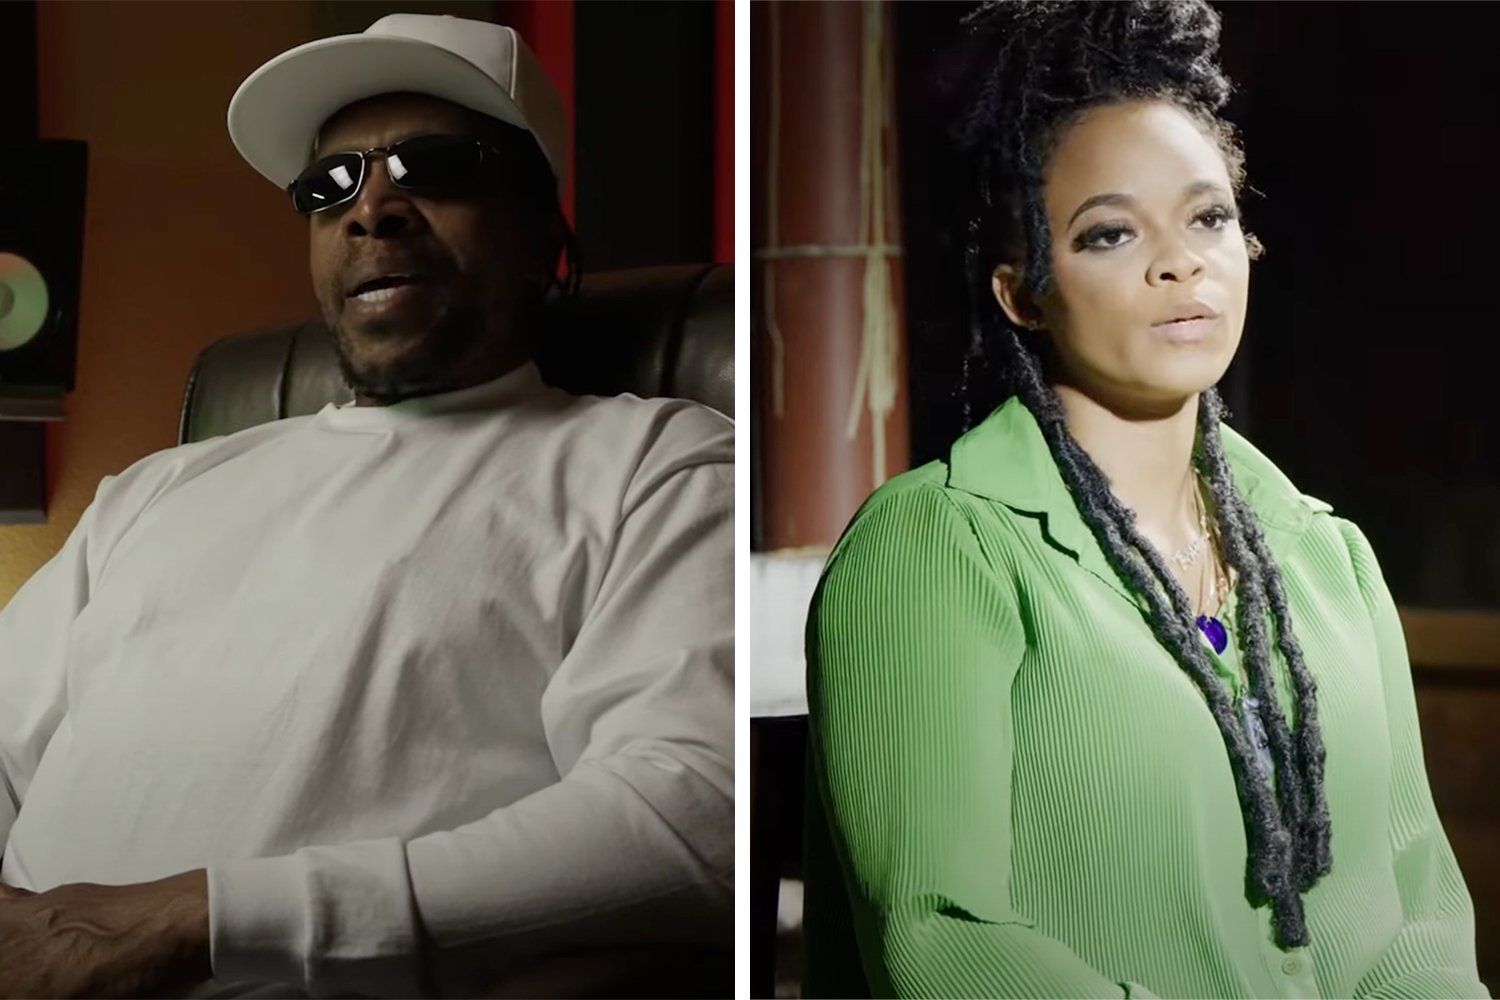 Ini Kamoze, Lila Iké Share Video For New Song ‘I Want You’